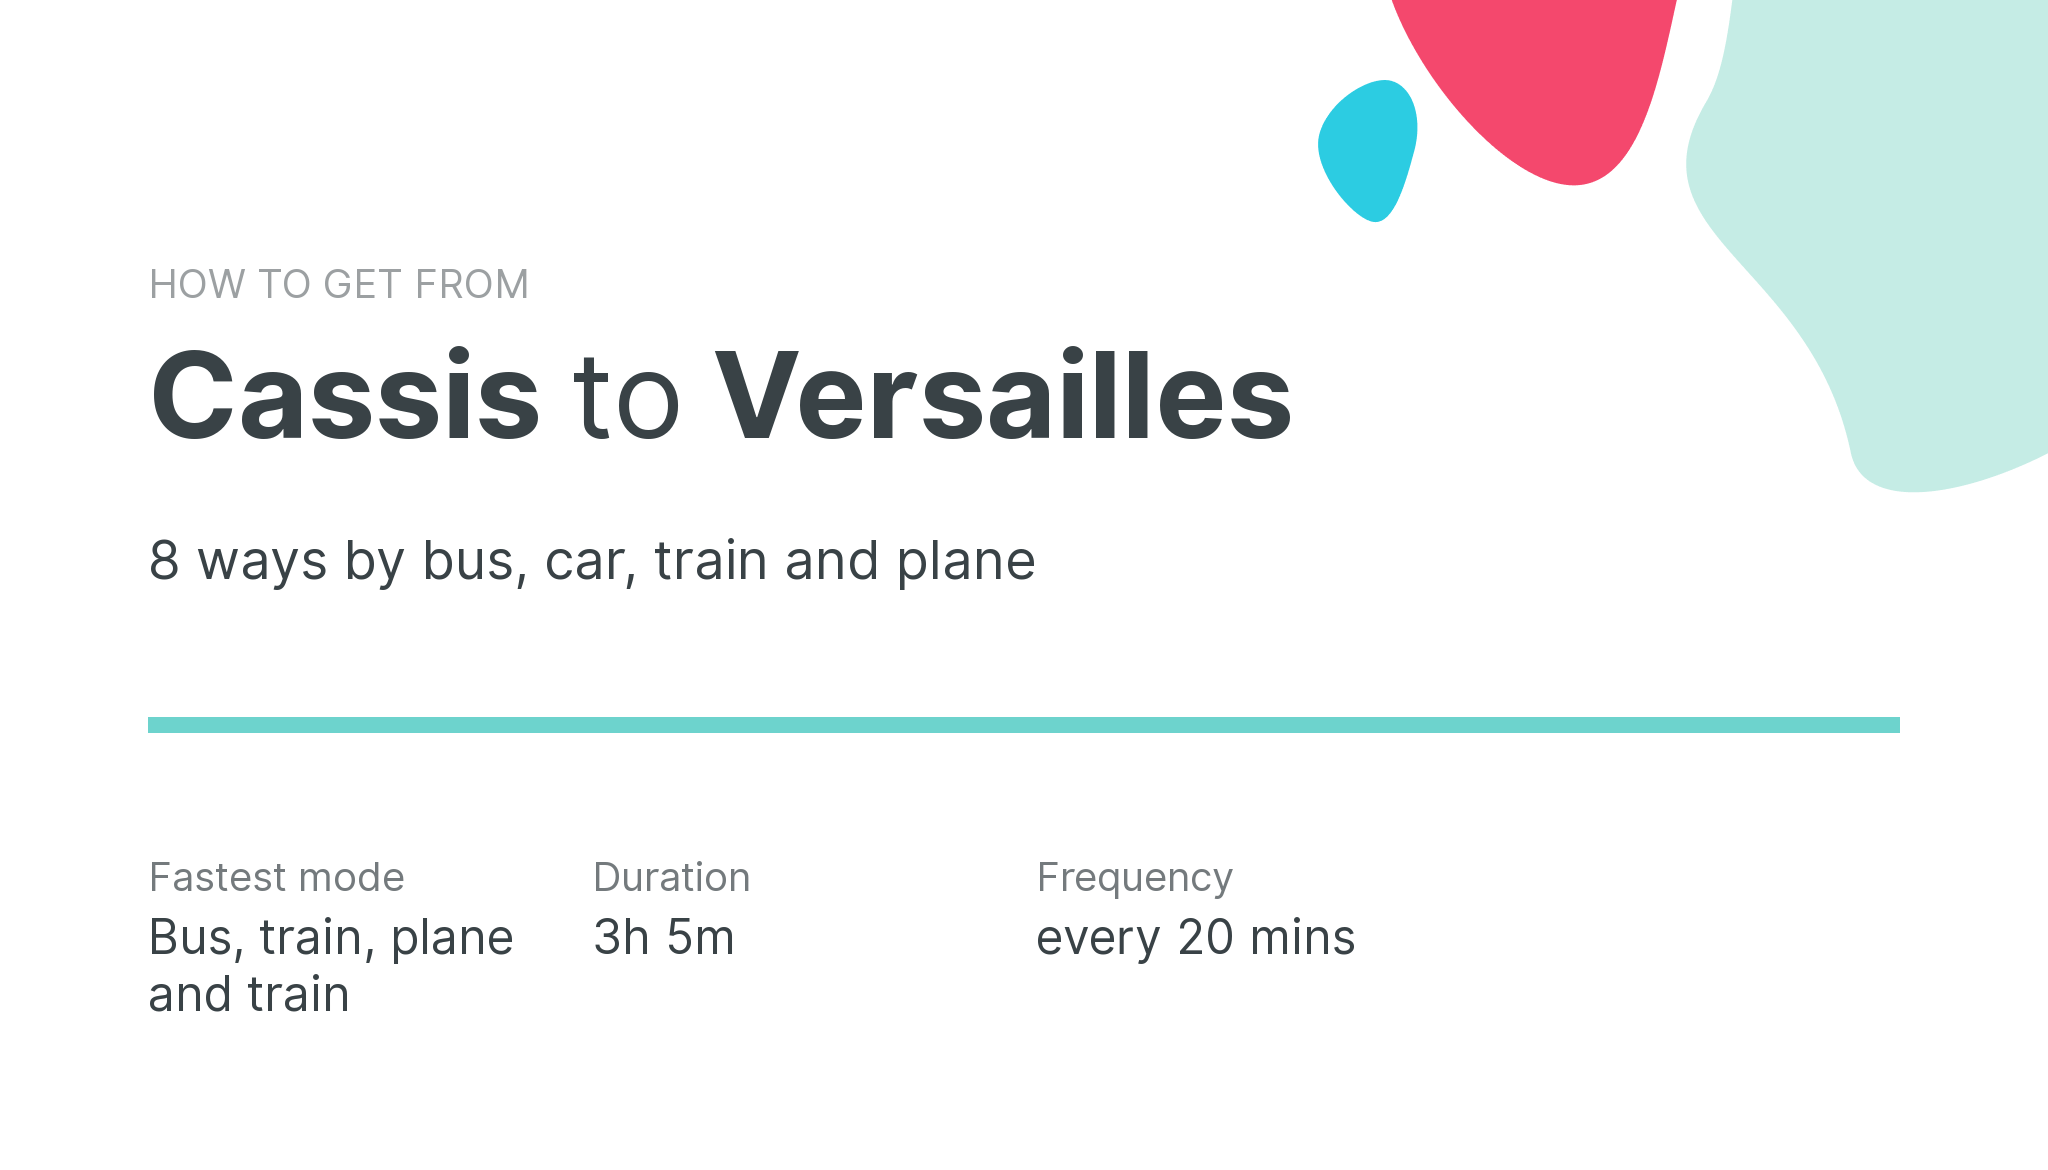 How do I get from Cassis to Versailles